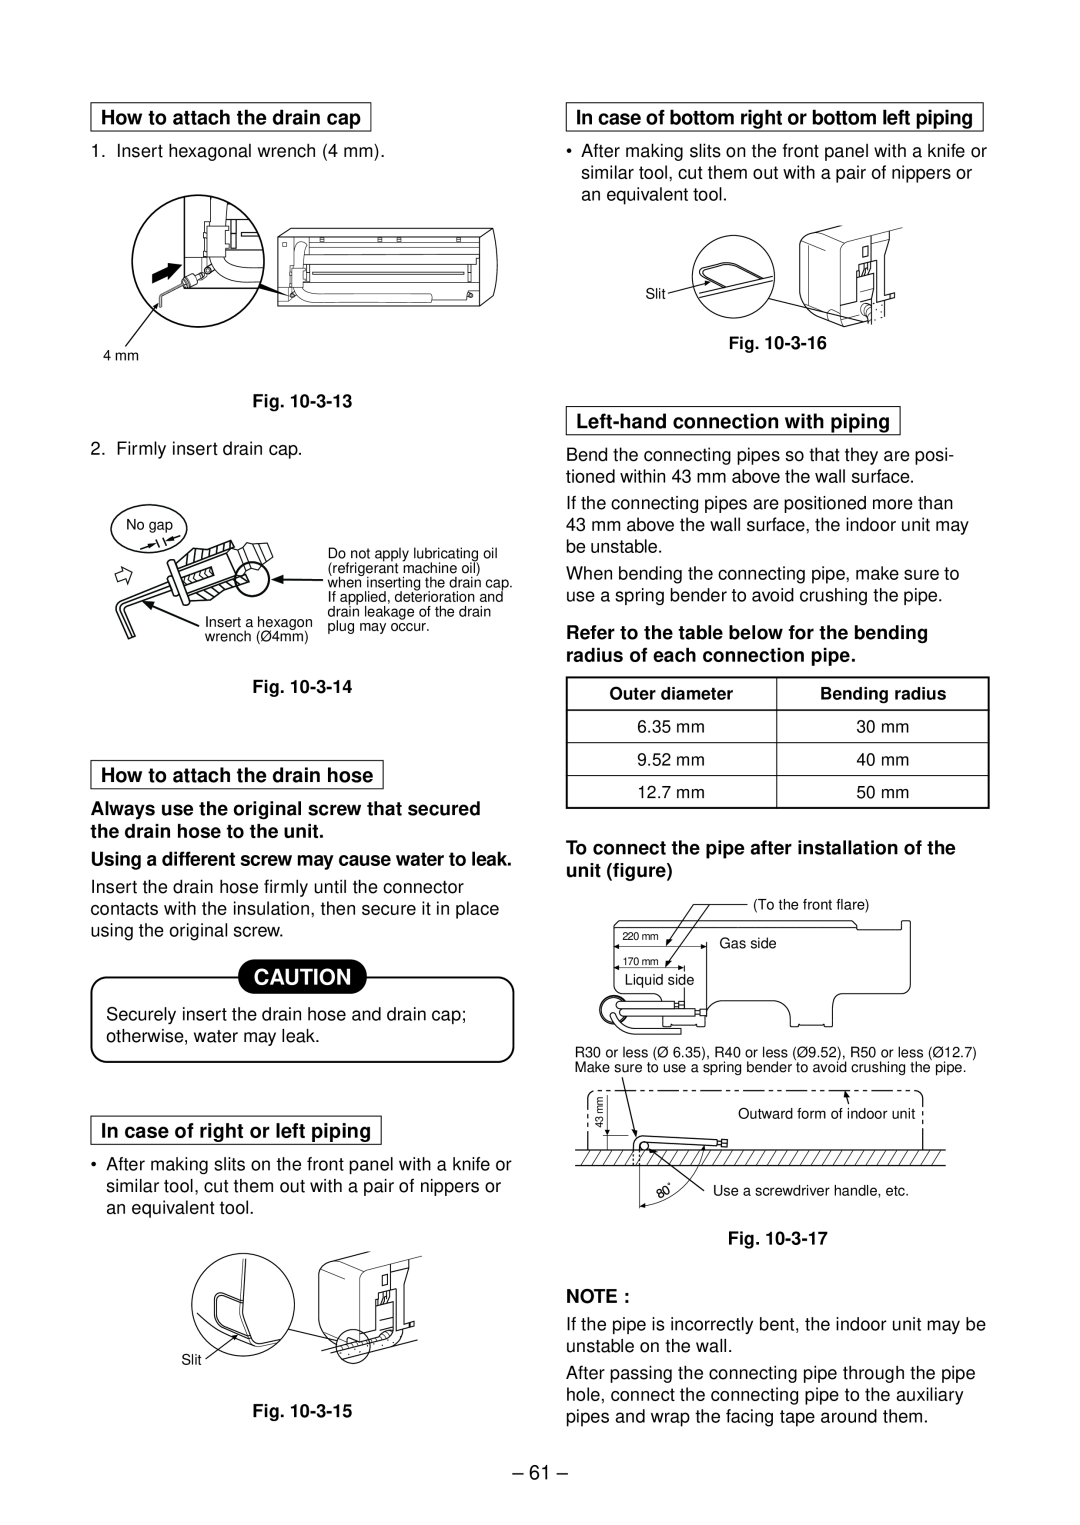 Toshiba RAS-B10SKVP-E How to attach the drain cap, How to attach the drain hose, Left-handconnection with piping 